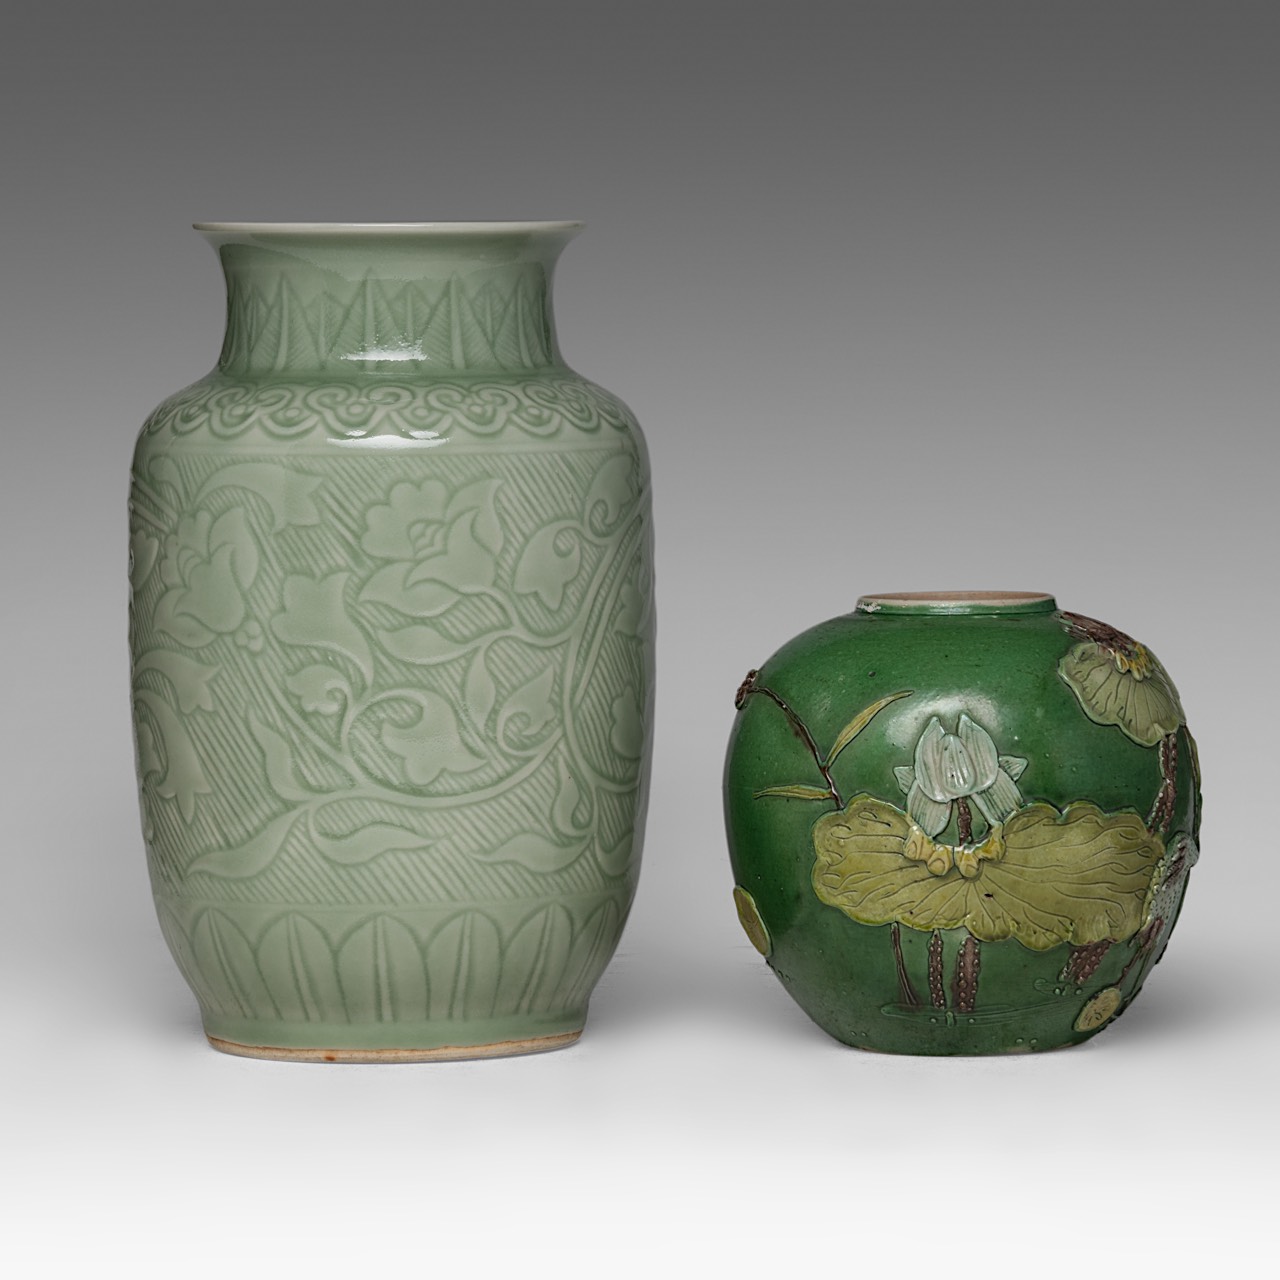 A collection of seven Chinese polychrome porcelain ware, 17thC, 19thC and 20thC, tallest H 30,4 cm ( - Image 11 of 17